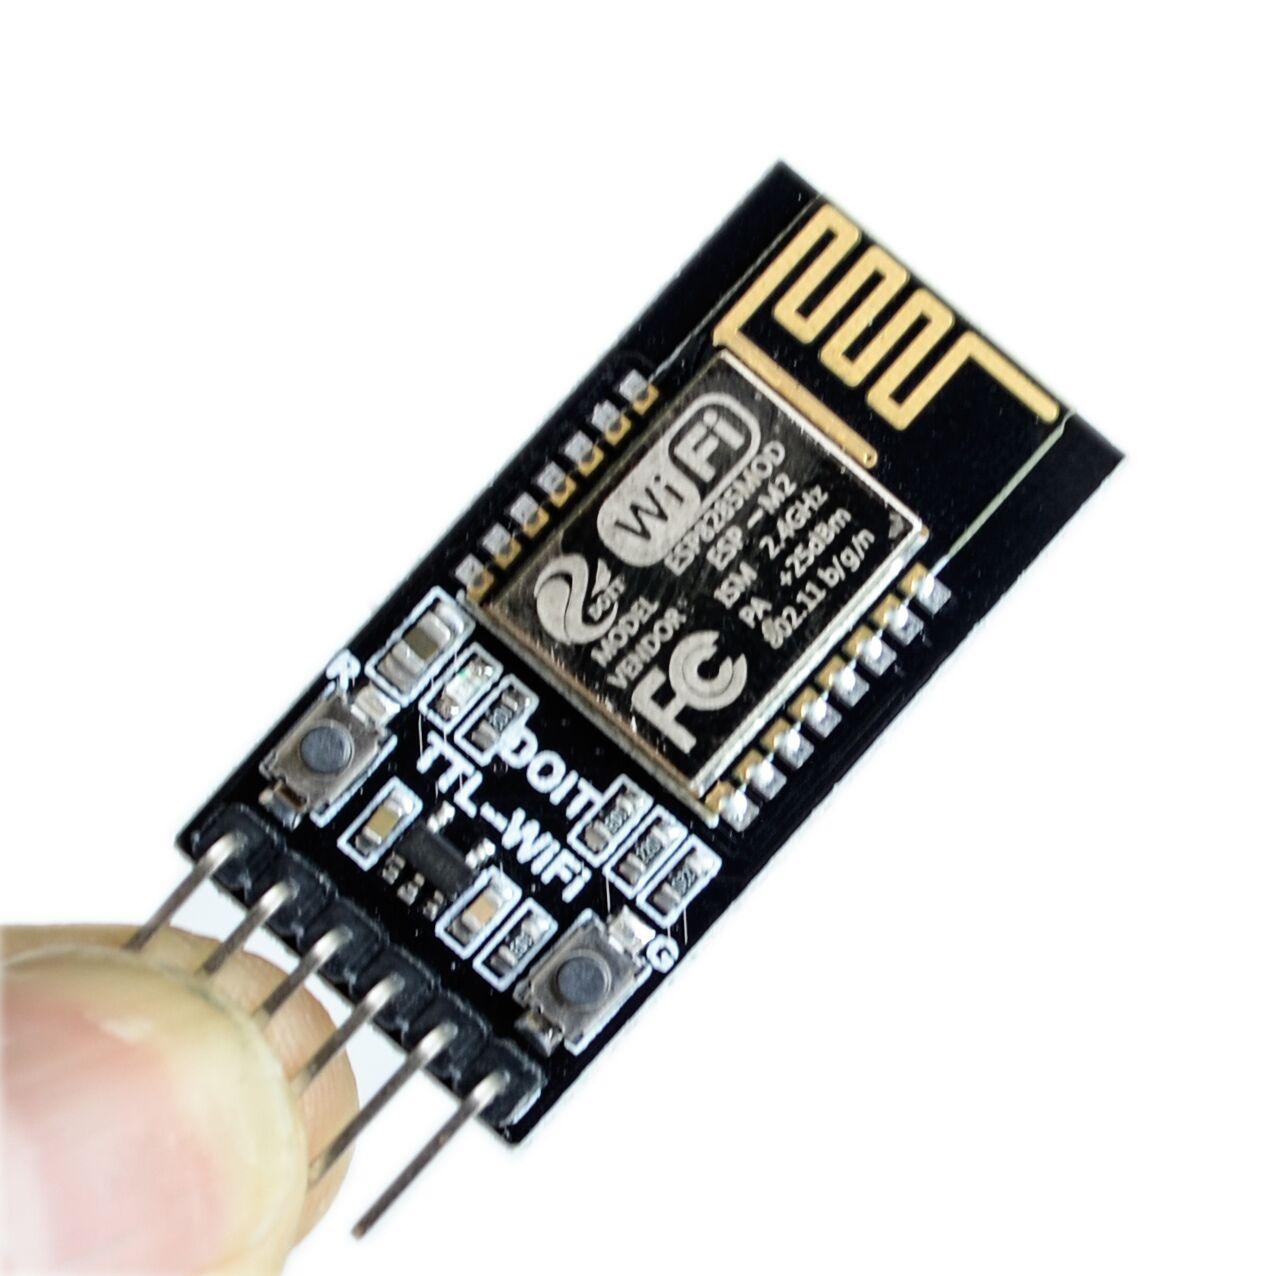 DT-06-Wireless-WiFi-Serial-Port-Transparent-Transmission-Module-TTL-to-WiFi-Compatible-with-Bluetooth-HC-06-interface-ESP-M2